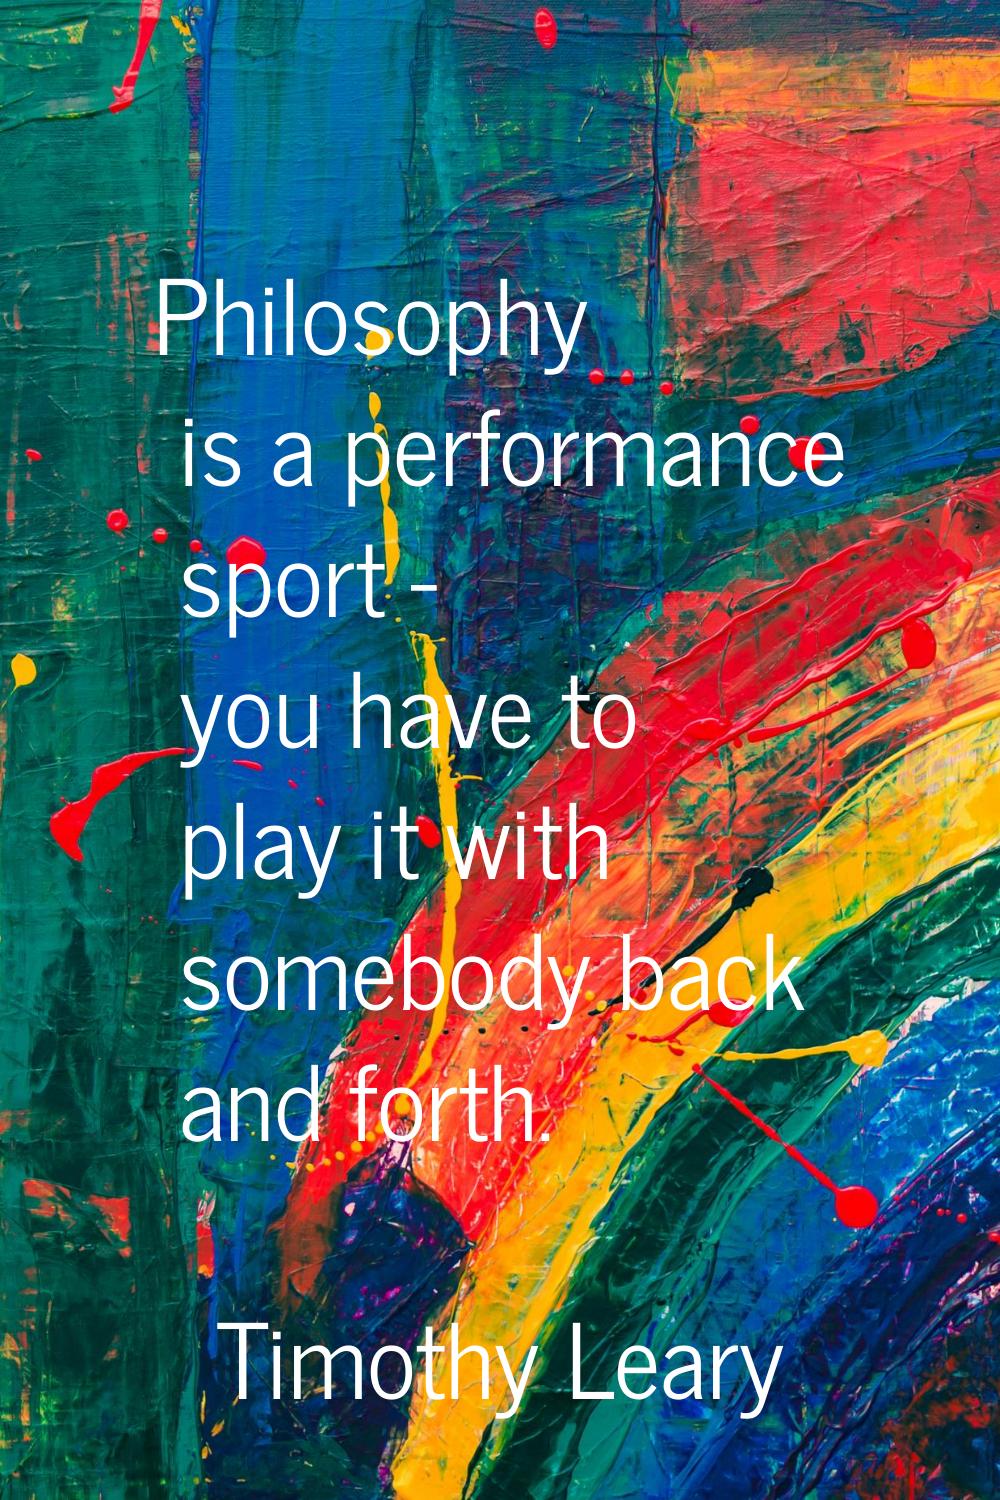 Philosophy is a performance sport - you have to play it with somebody back and forth.